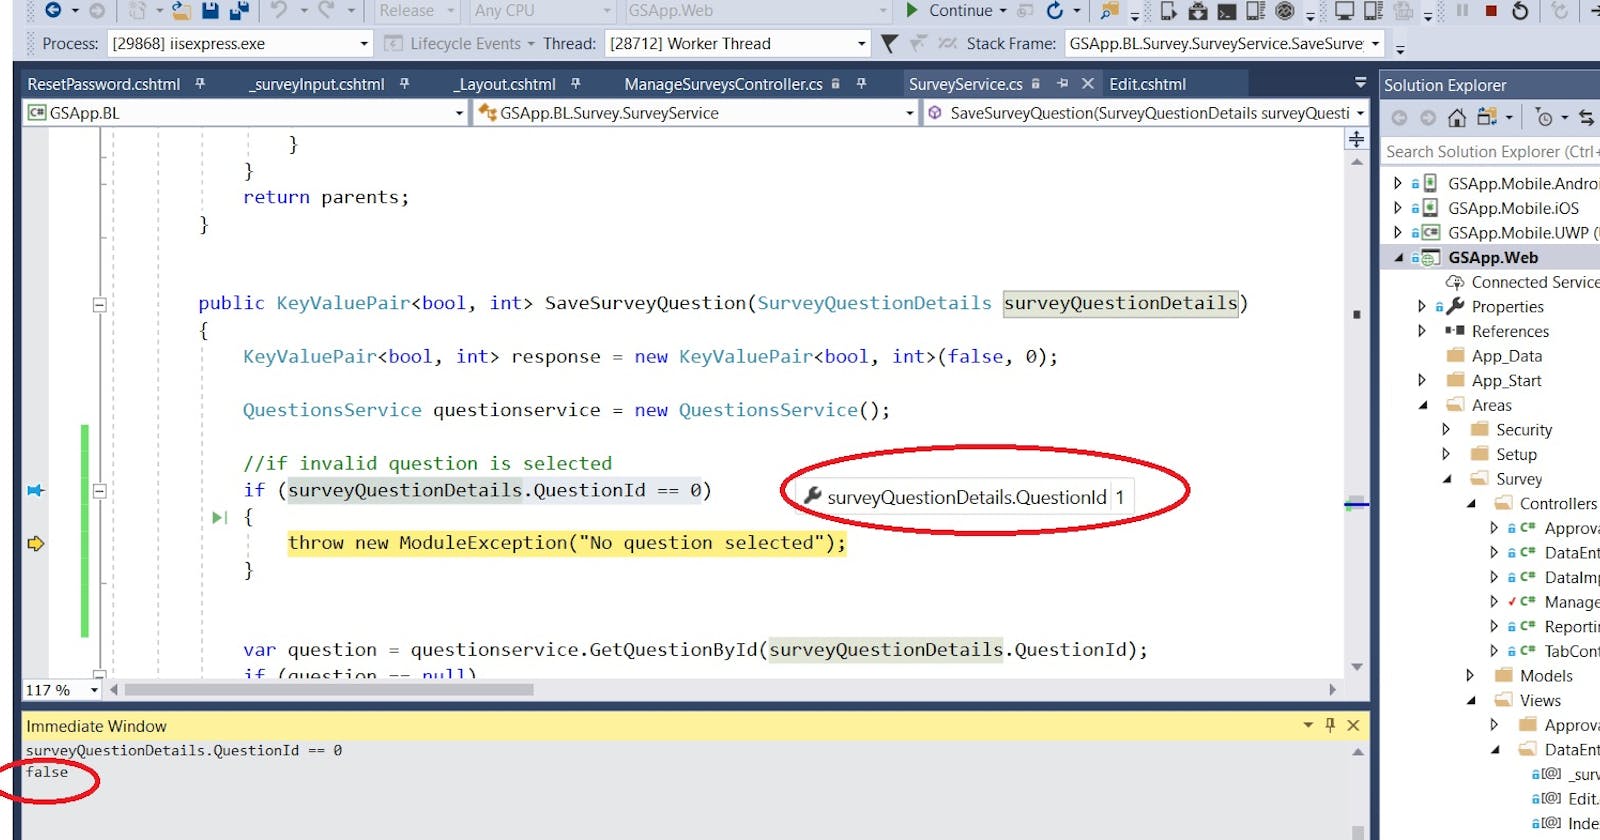 Code inside if statement executes while condition is false (Asp.Net MVC, C#)